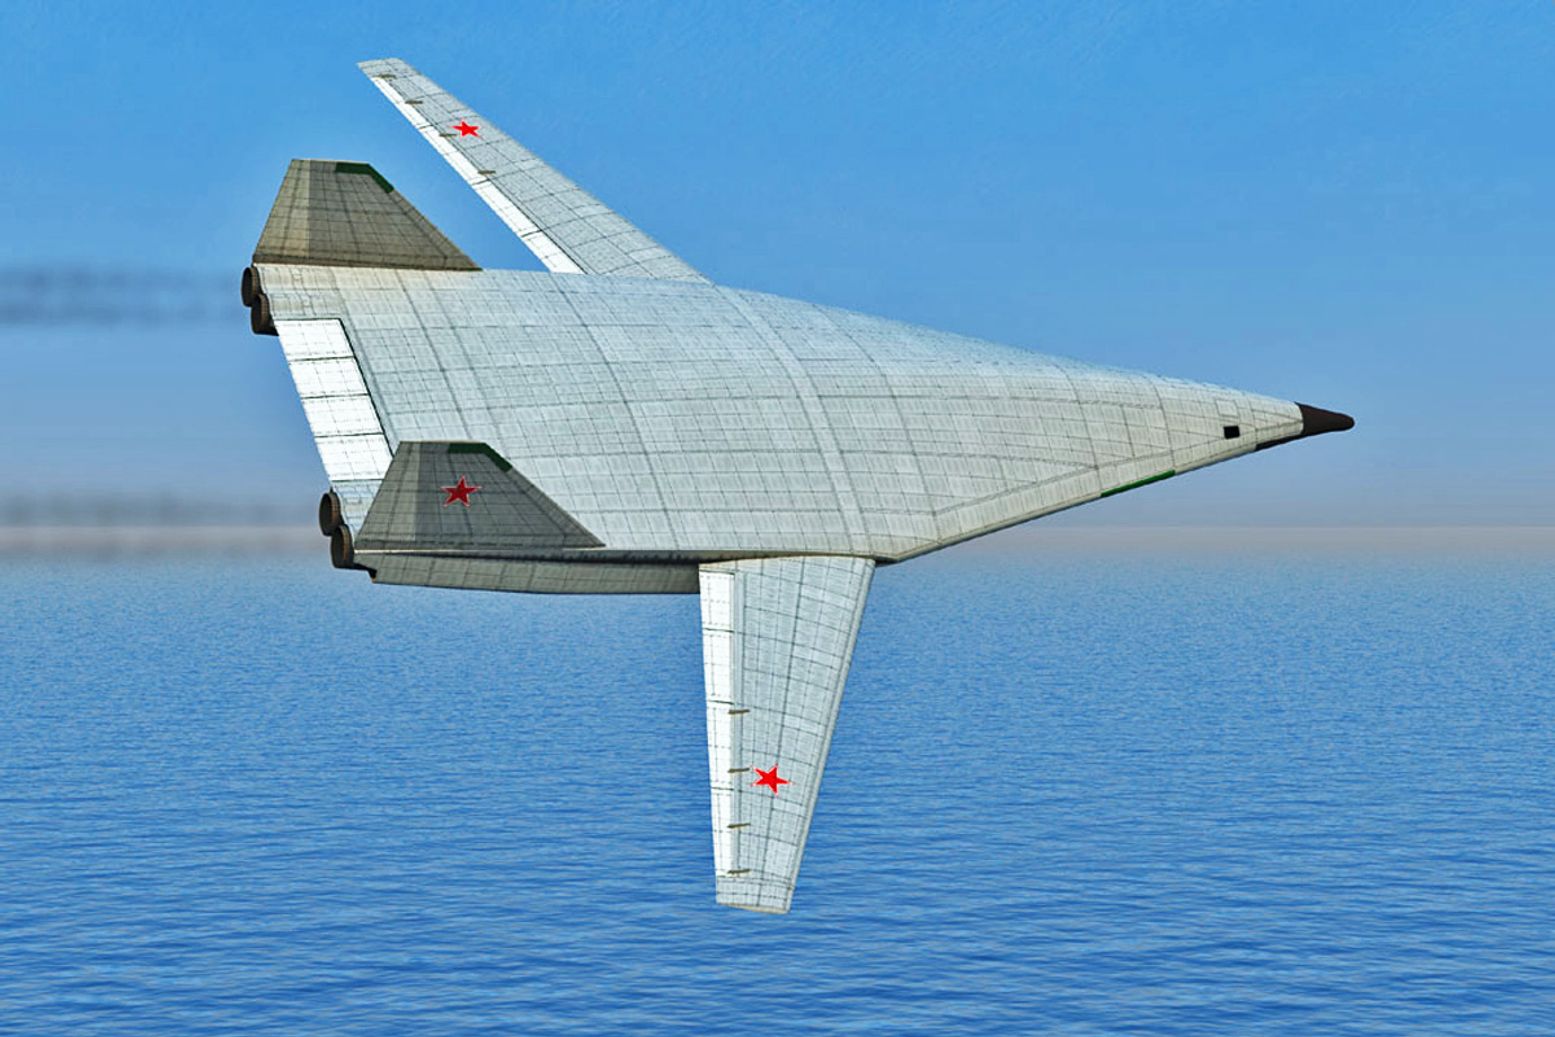 Russia's Mystery Bomber: Why so Little Is Known About PAK-DA Stealth